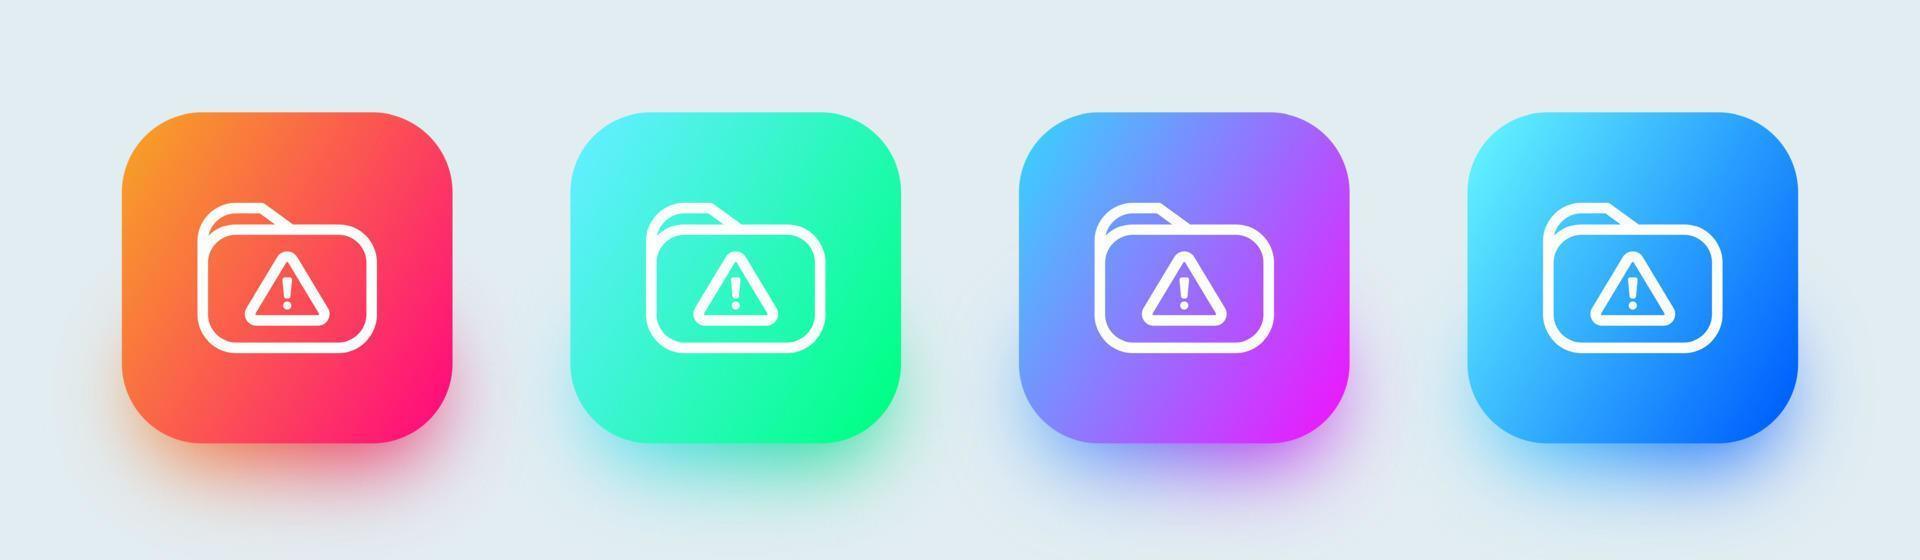 Error folder line icon in square gradient colors. Warning signs vector illustration.